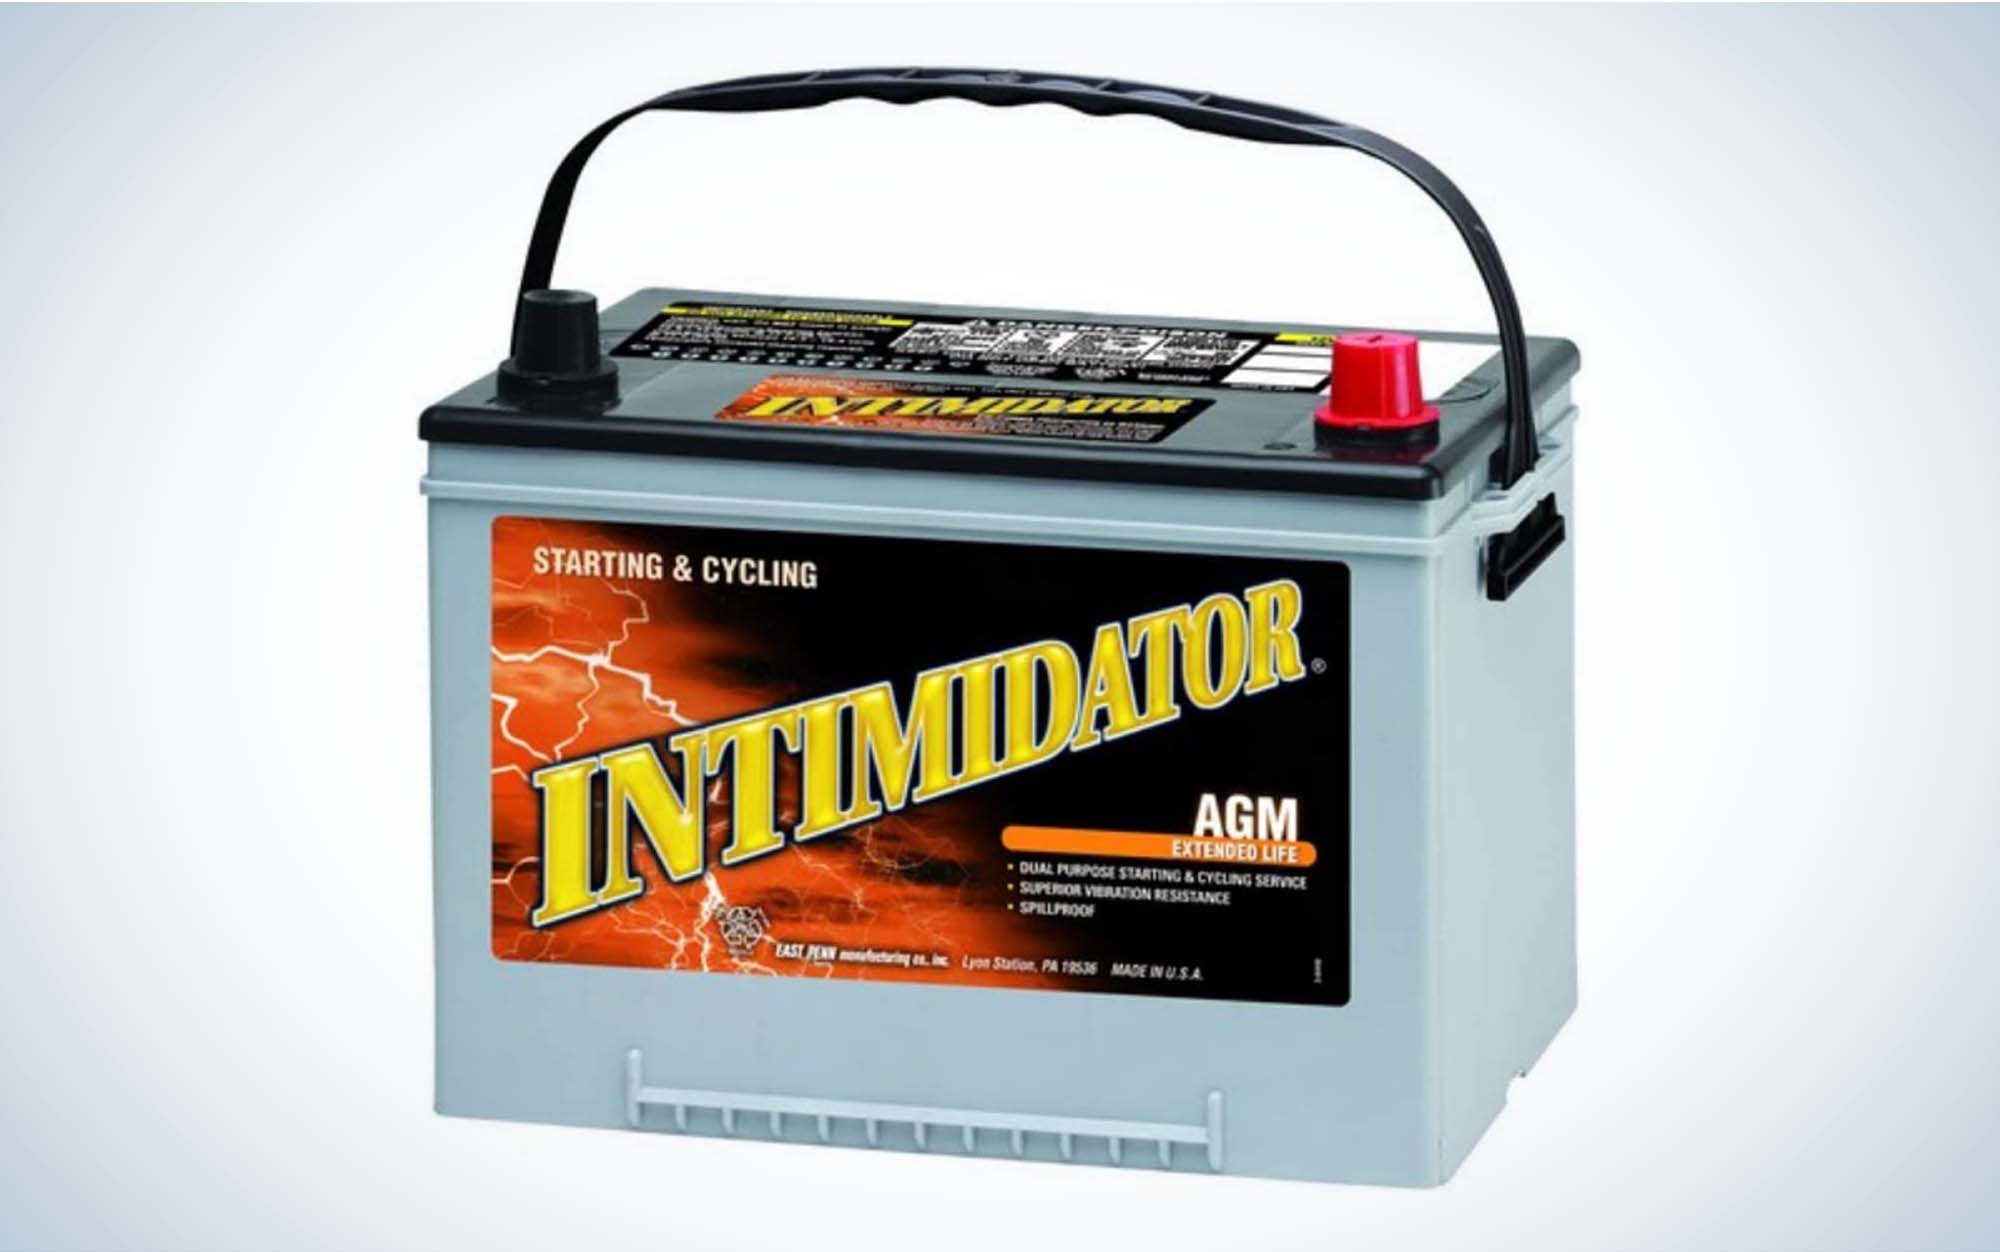 The intimidator AGM trolling motor batteries are reliable and long lasting.